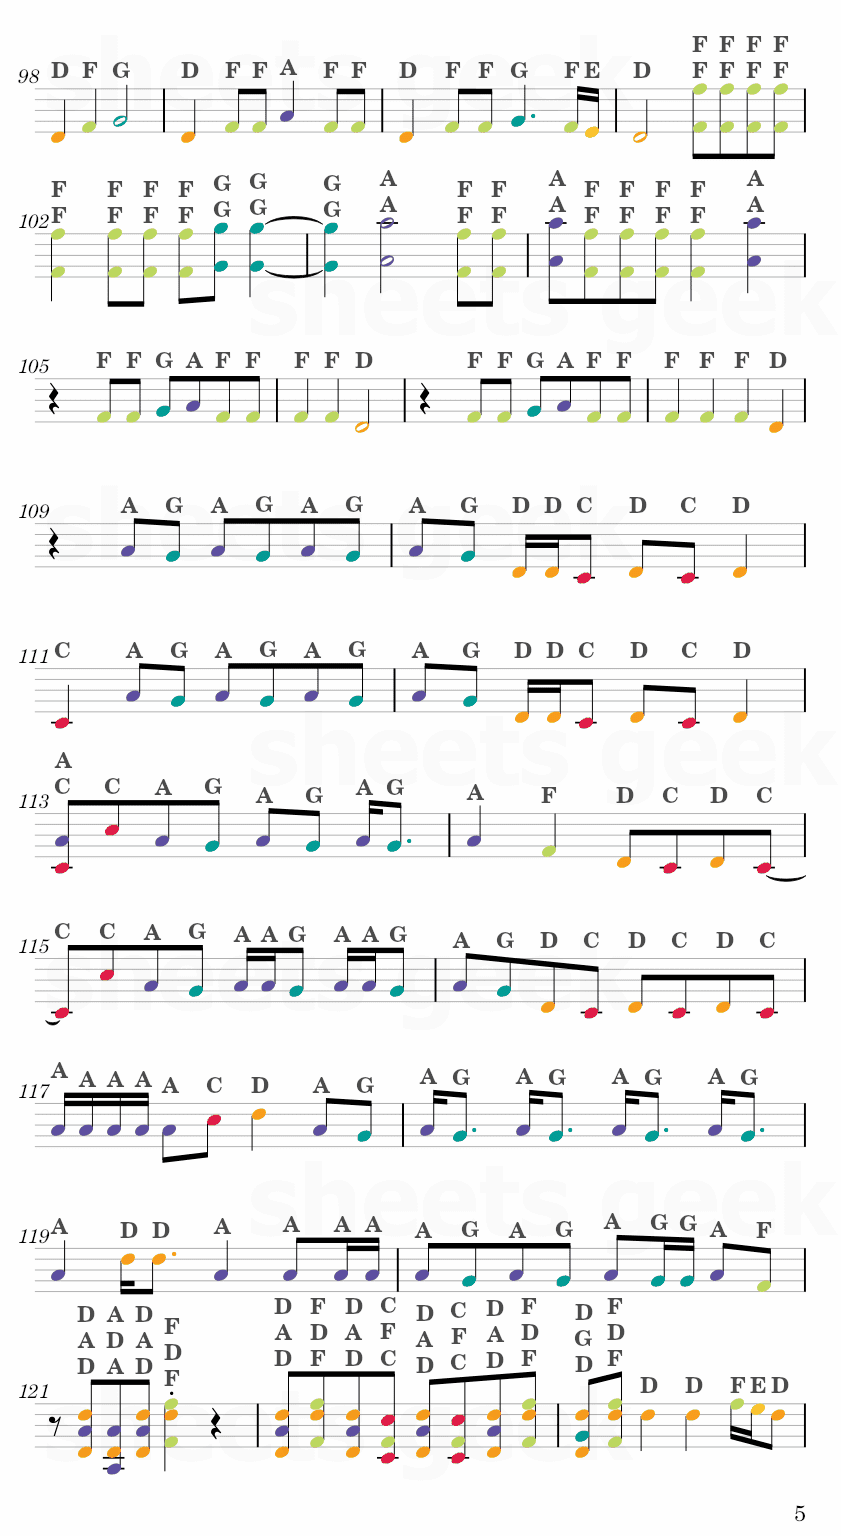 Sticker - NCT 127 Easy Sheet Music Free for piano, keyboard, flute, violin, sax, cello page 5